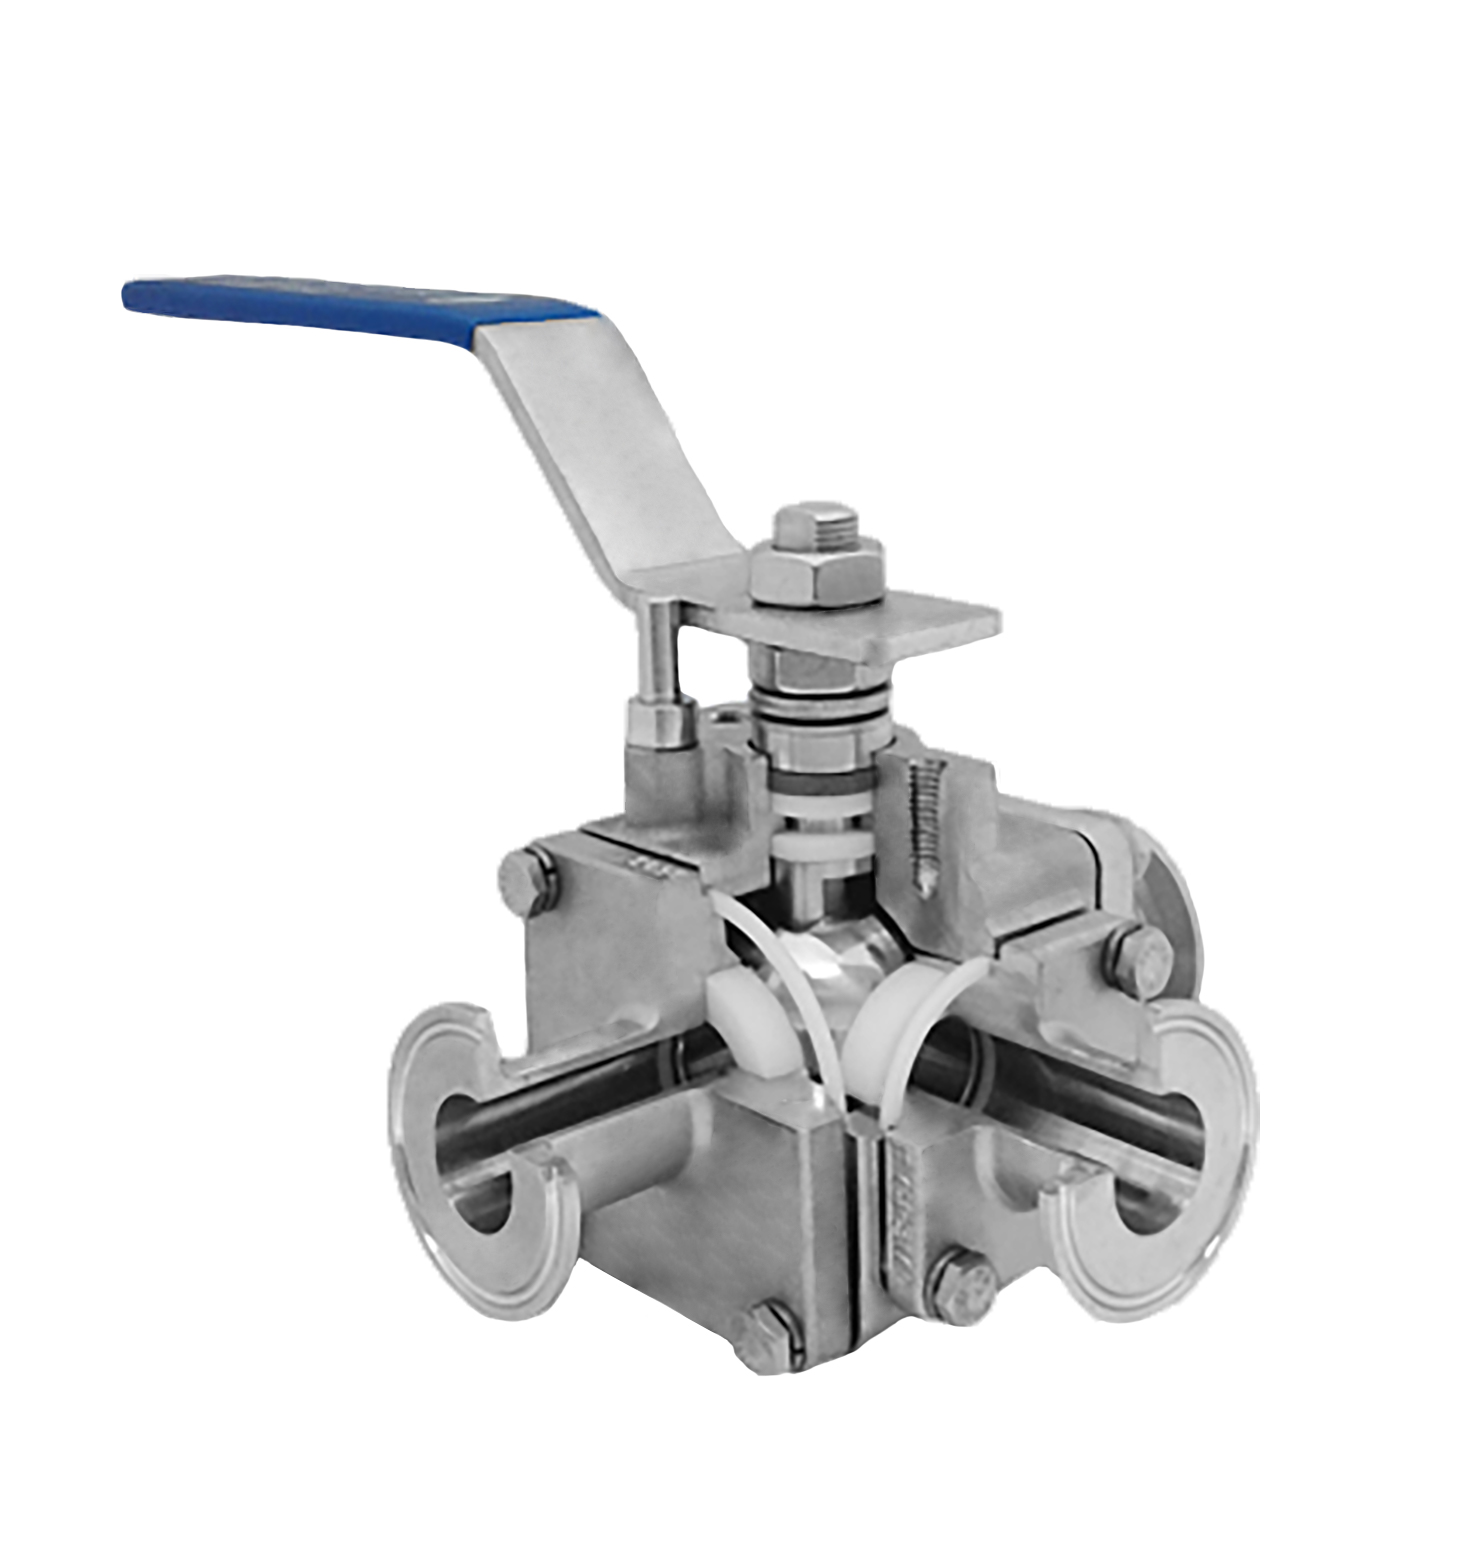 Sanitary Double Check Valve: Function, Operation, & Application